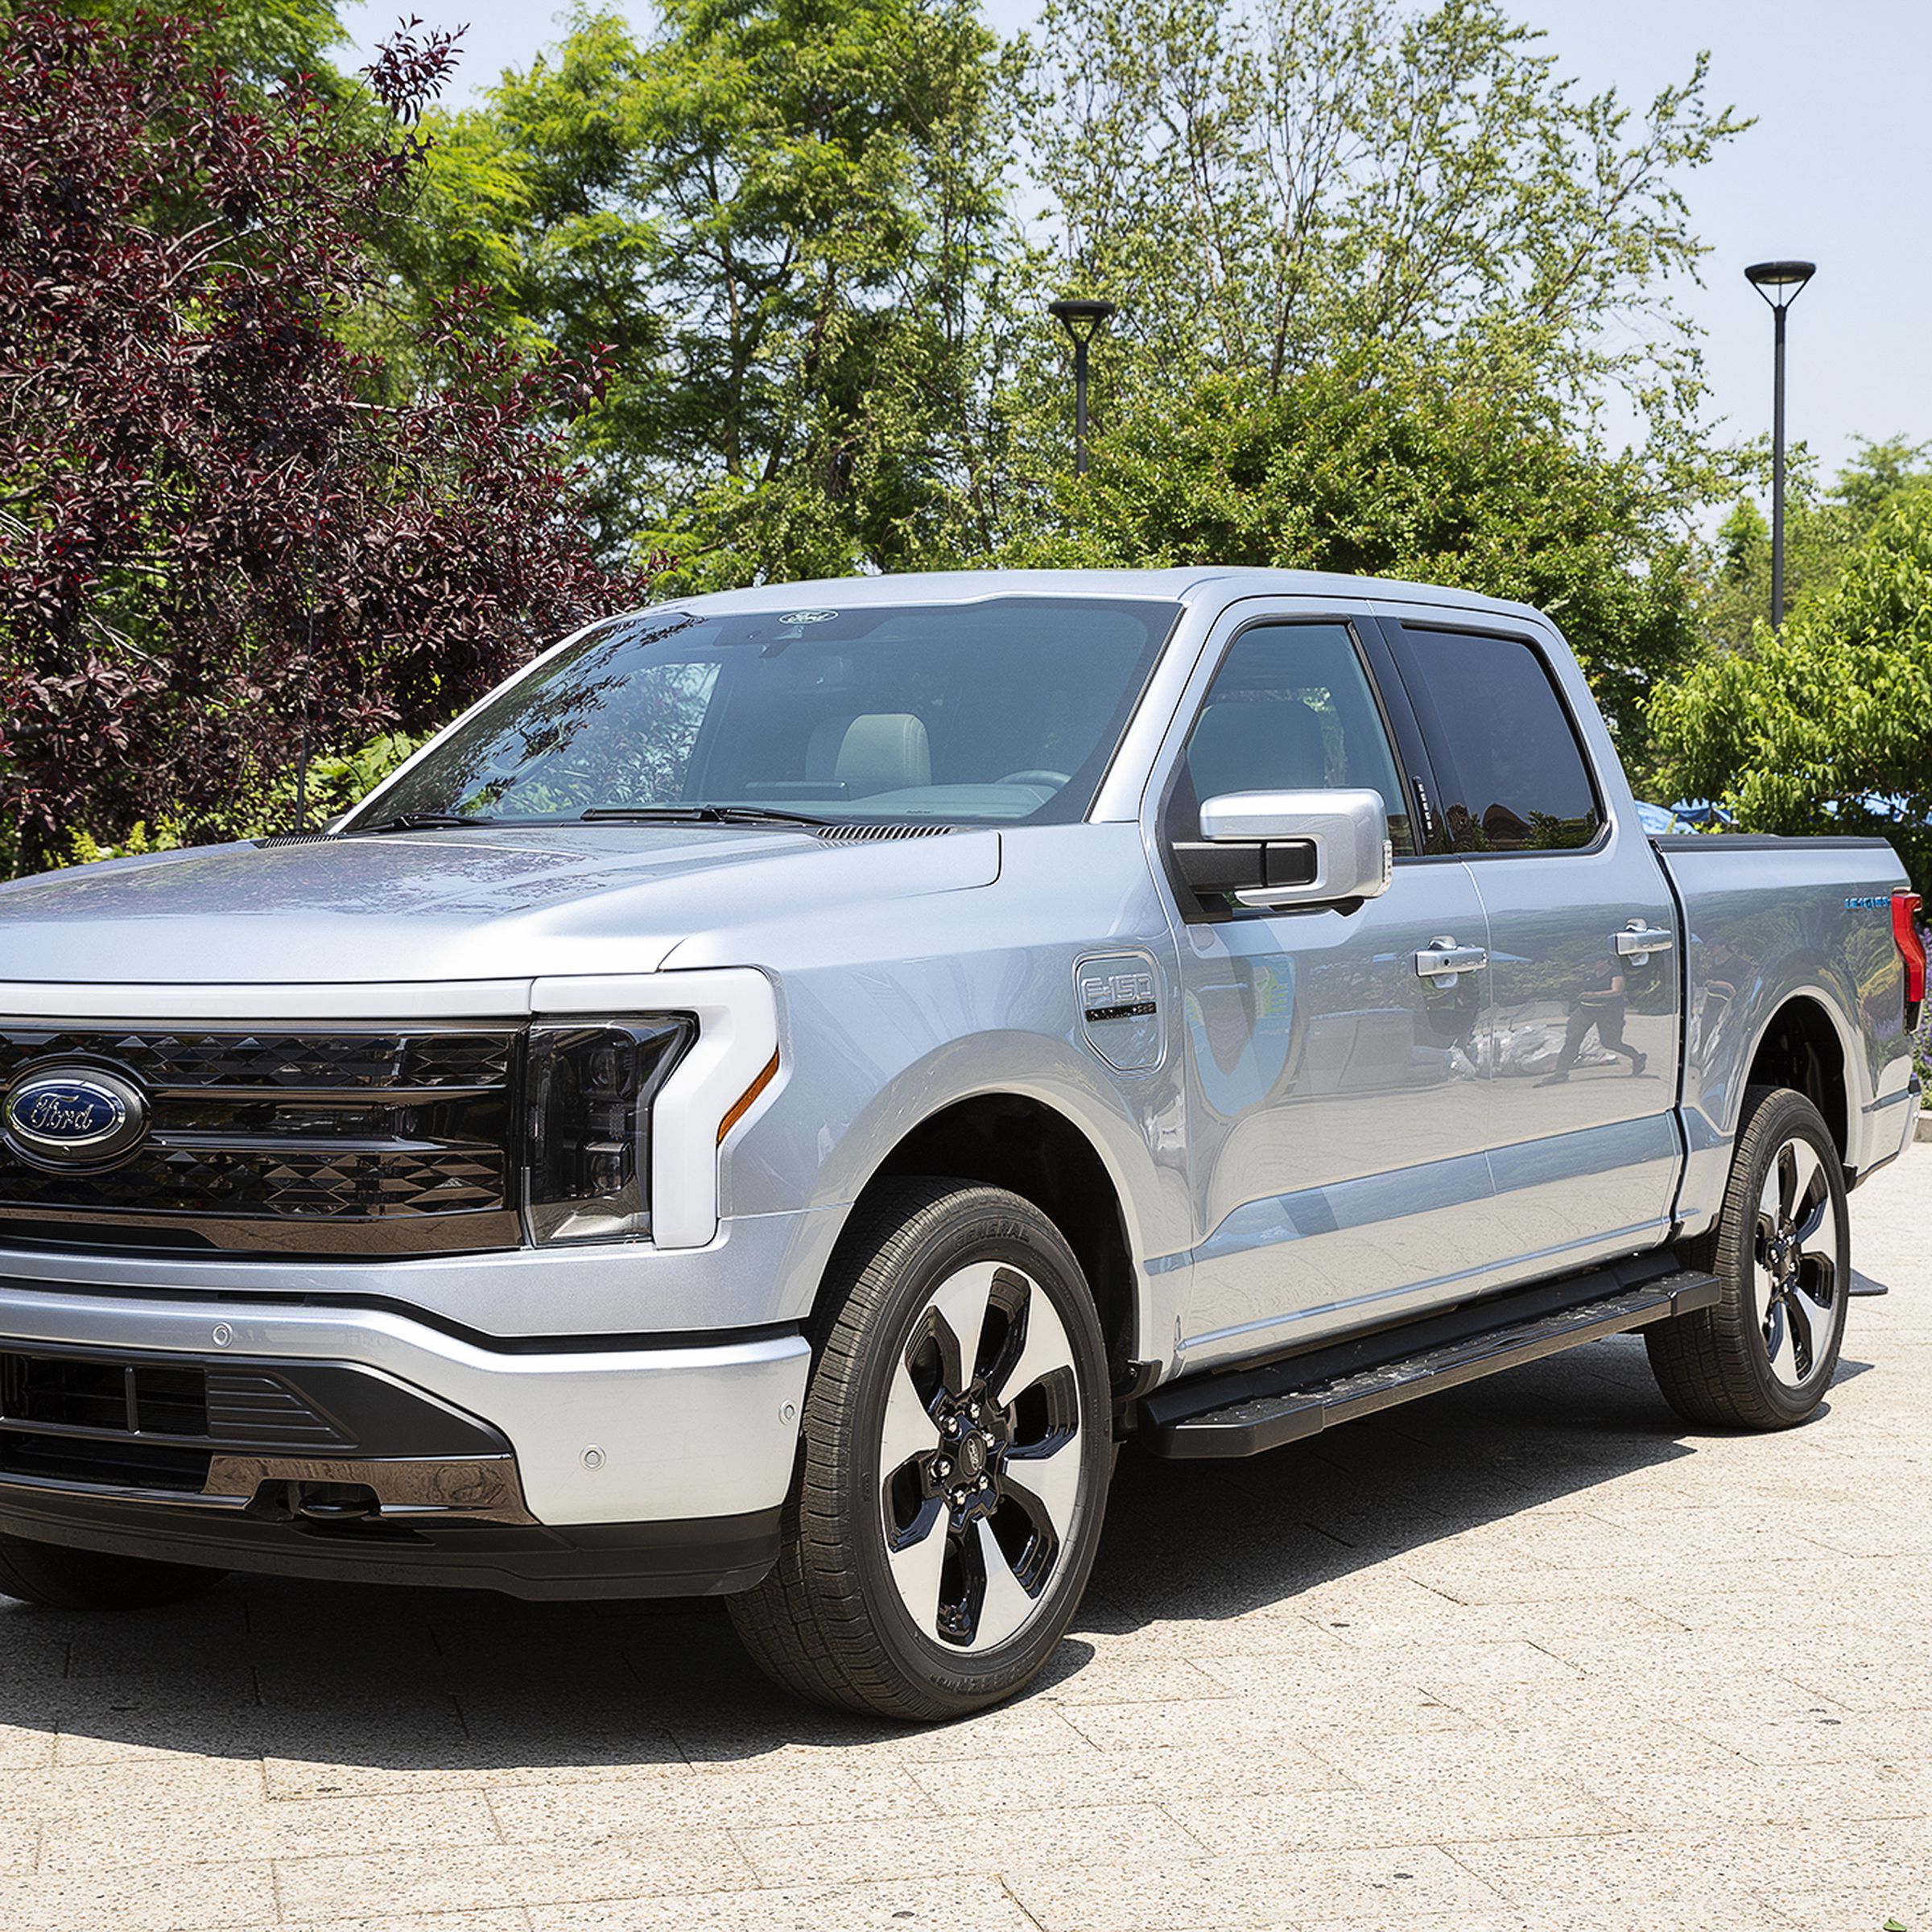 The Ford F-150 Lighting EV parked